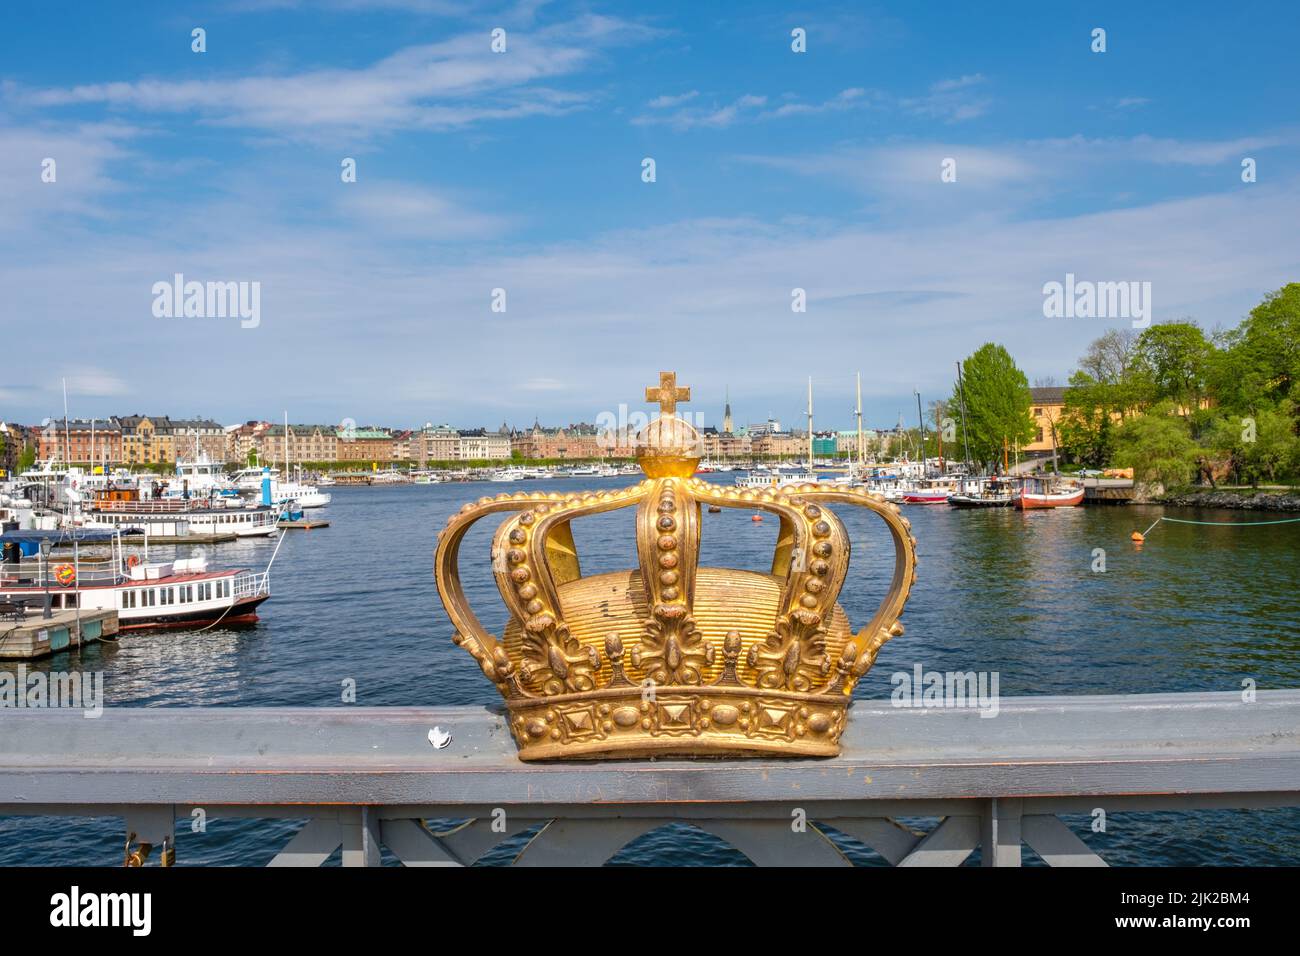 View from Skeppsholmen bridge in Stockholm. The capital city of Sweden is built on 17 islands. Stock Photo